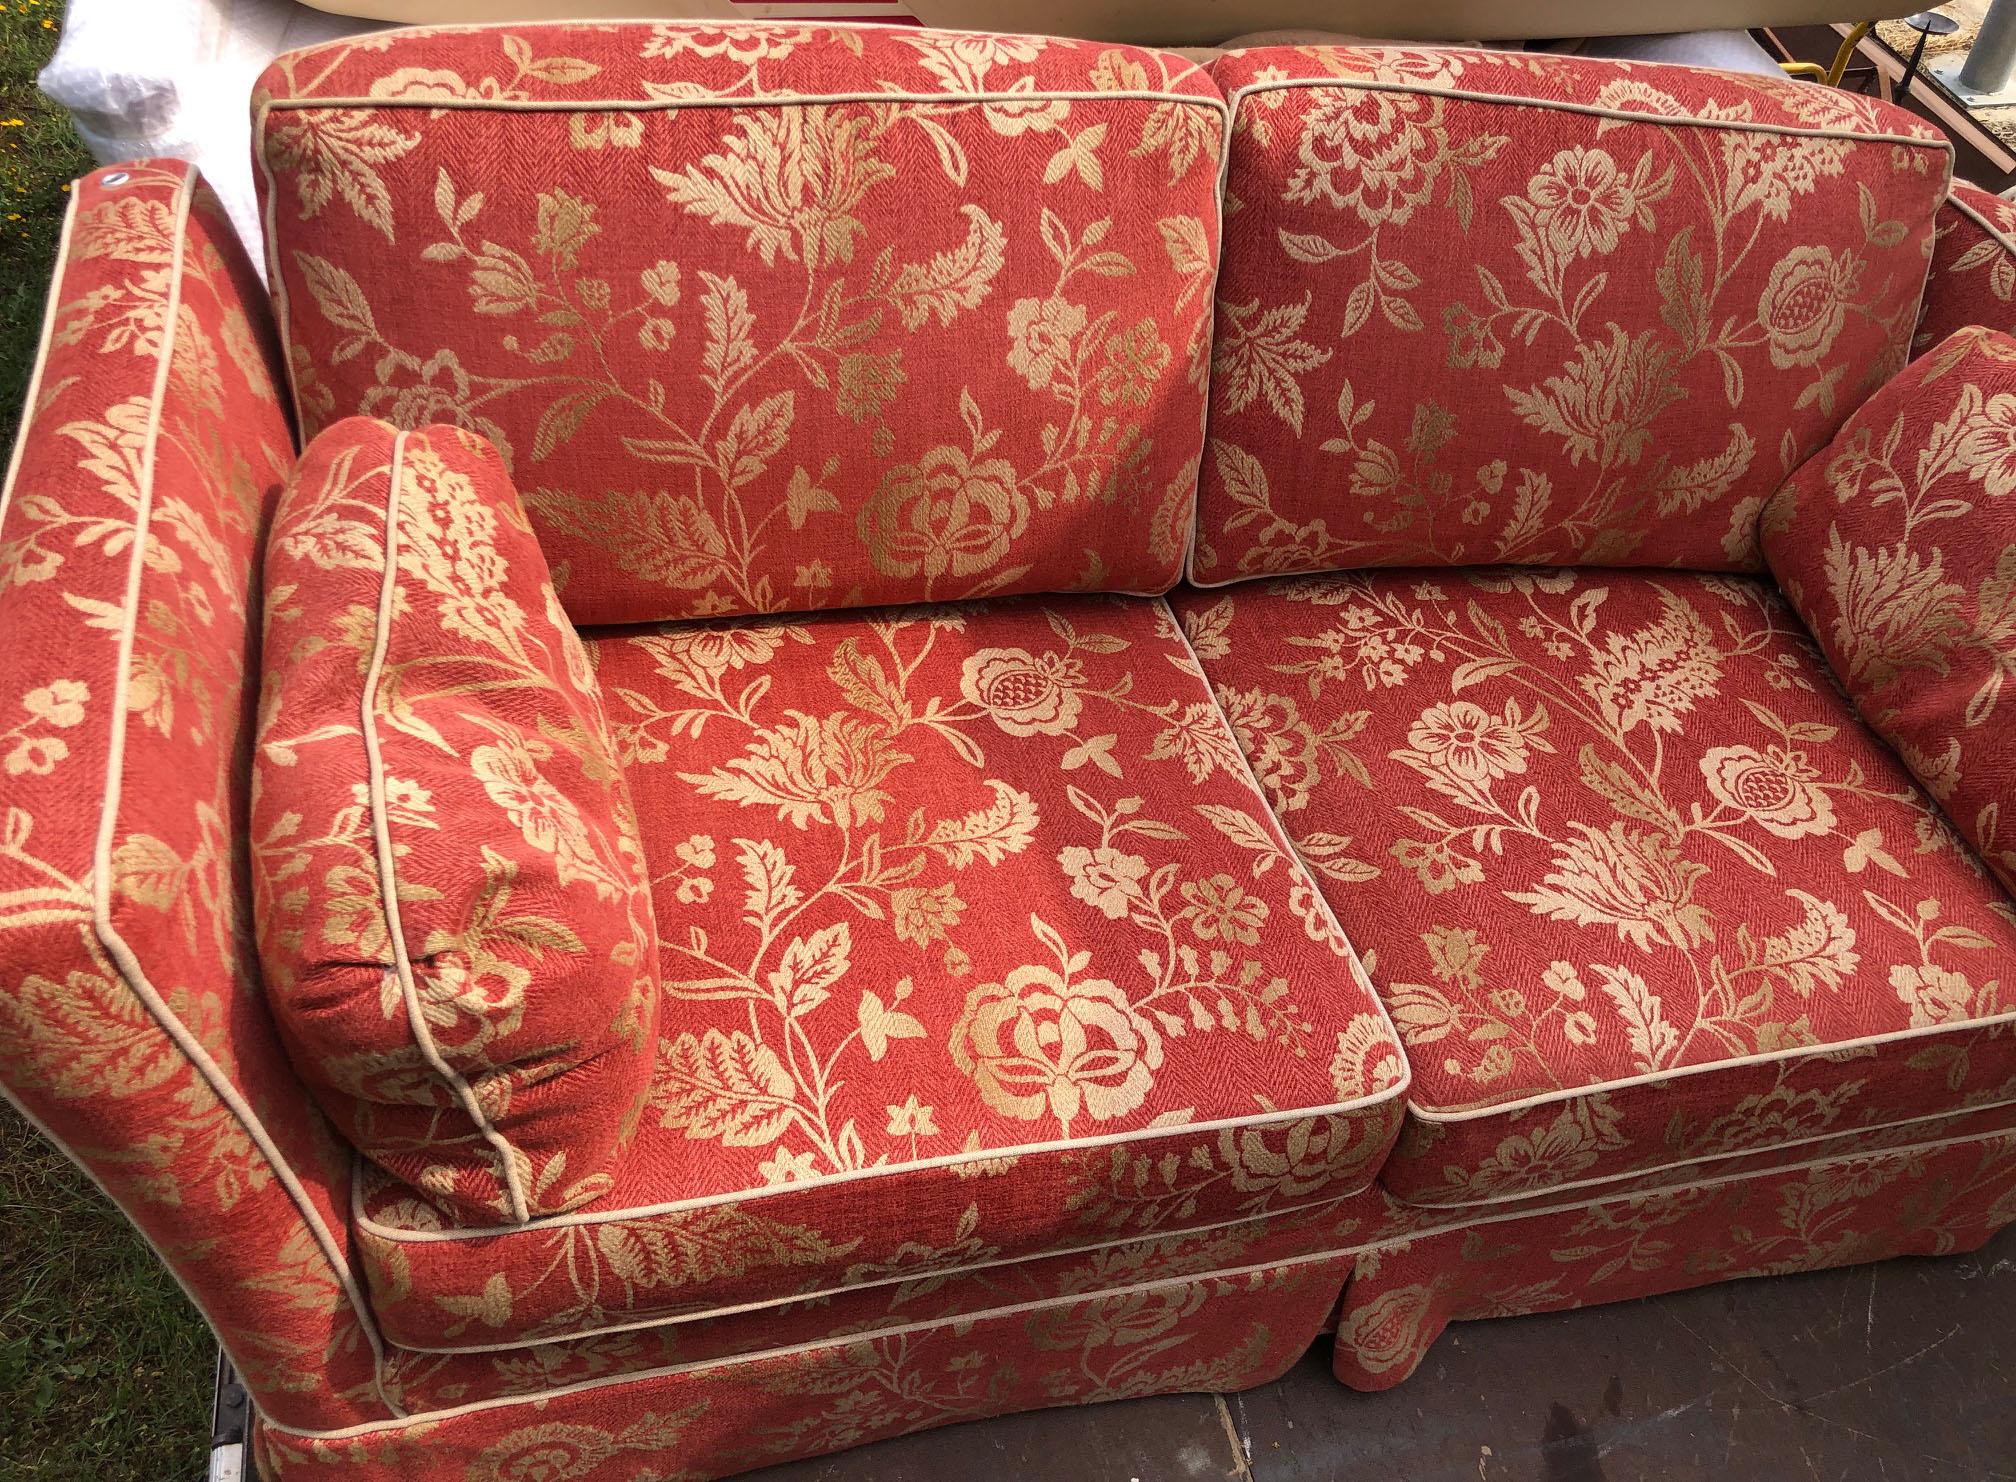 Very elegant fabric sofa with floral motifs.
I have two of the same in my warehouse.
The fabric is in excellent condition.
Comes from an old country house in the Lucca area of Tuscany.
Both were placed opposite each other in a large living room